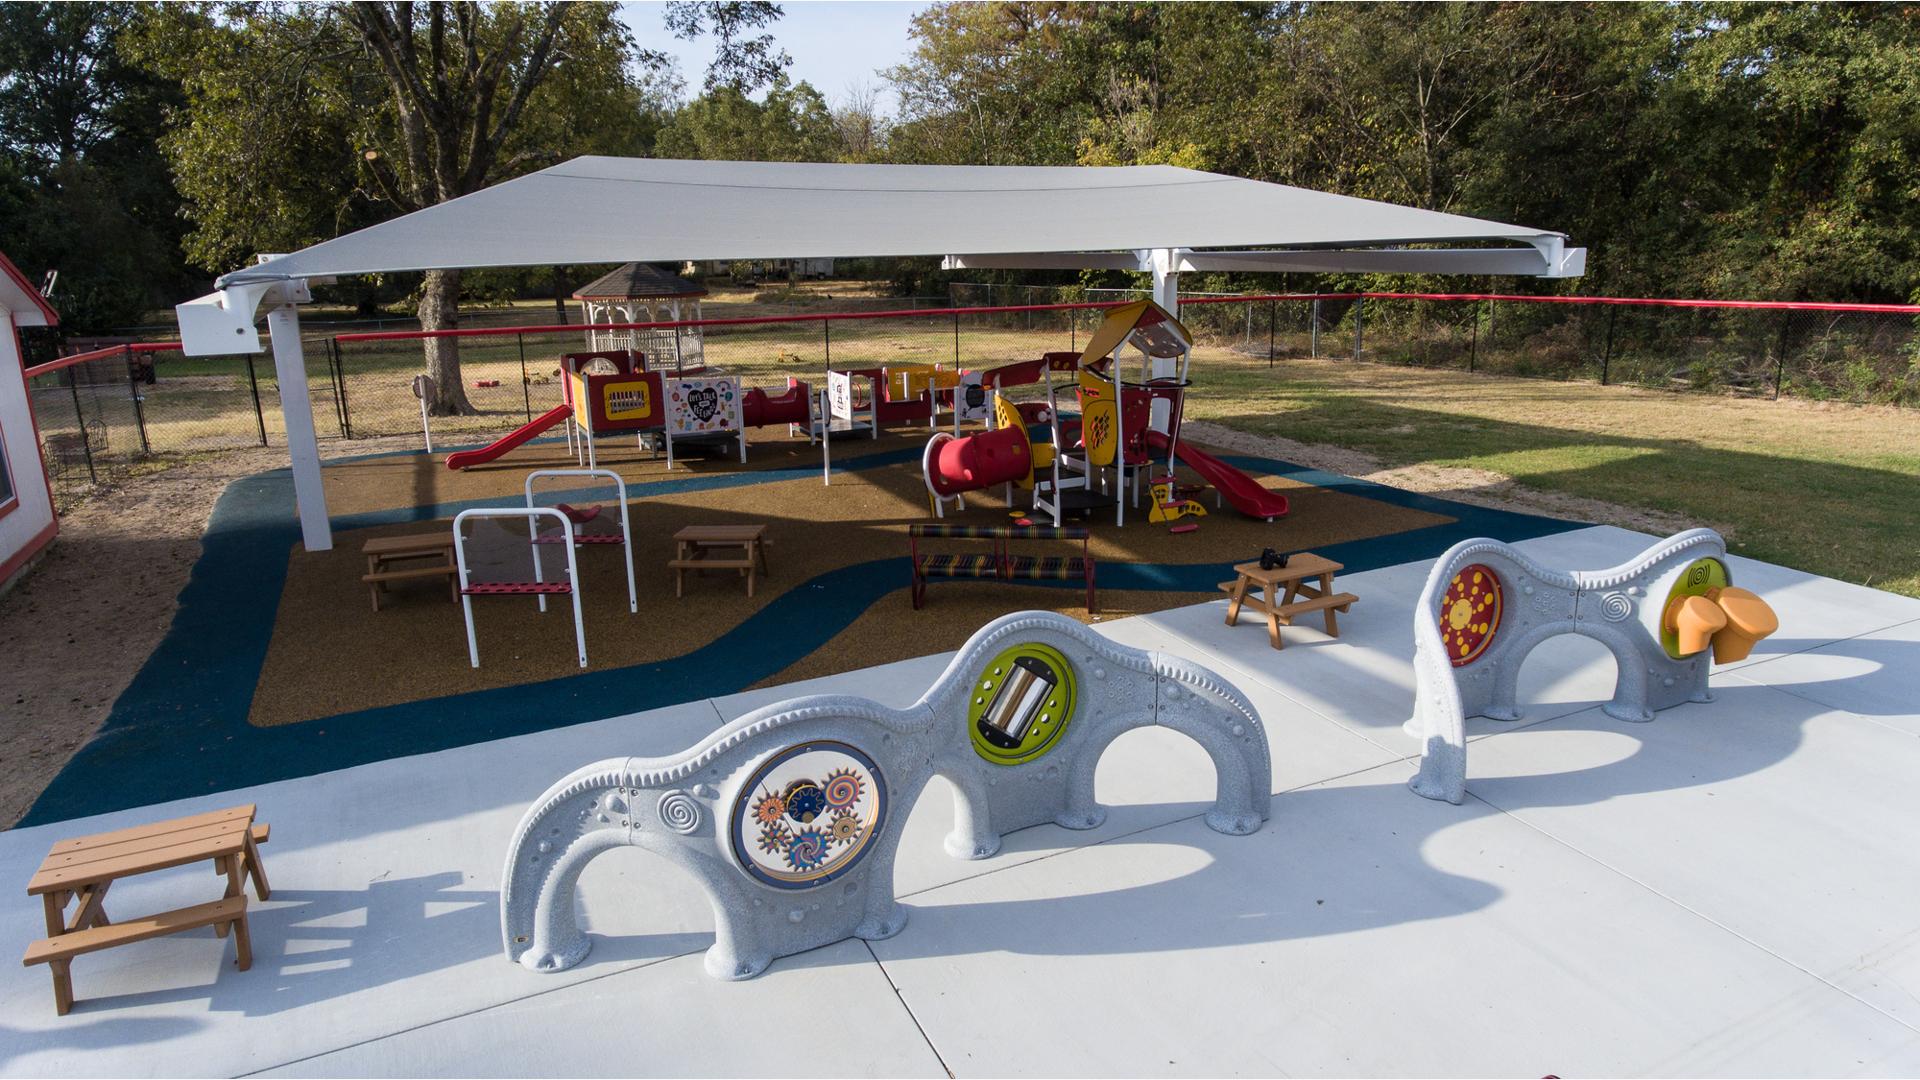 Two sensory play panel walls sit in the foreground while in the background a grey shade structure stands over a play area with two play structures and children sized picnic tables. 